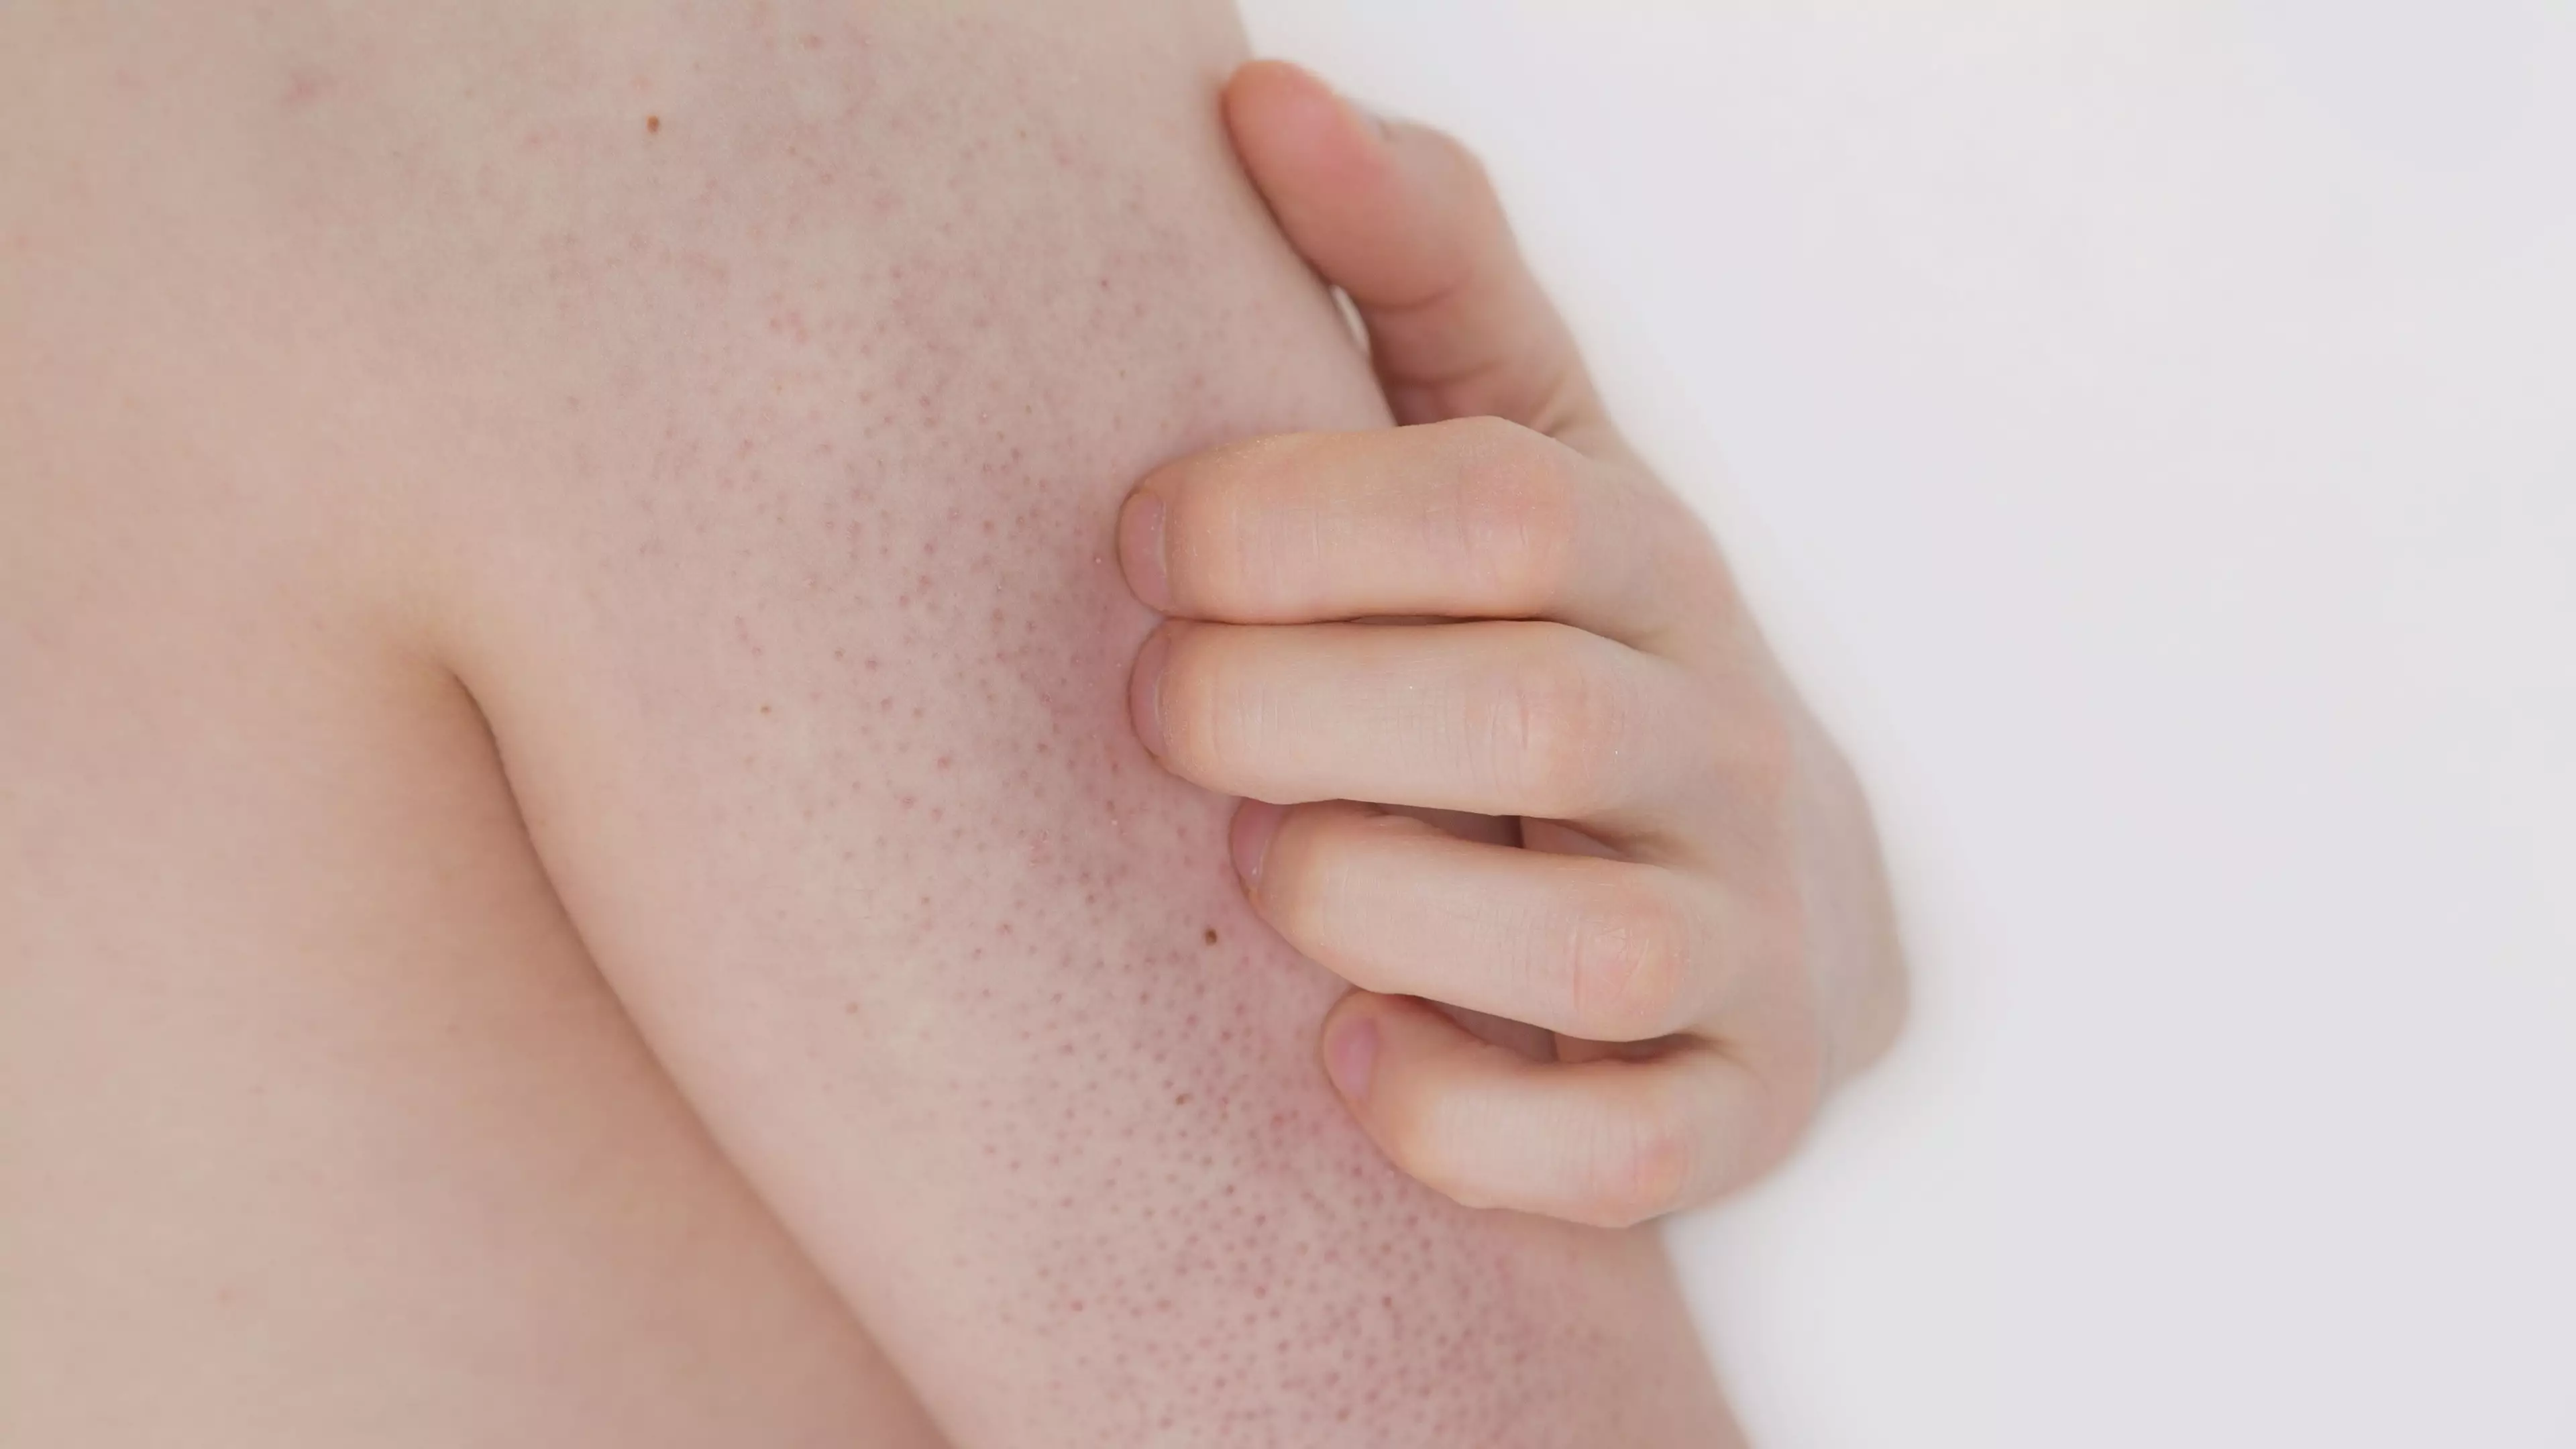 Here's How To Get Rid Of Chicken Skin AKA Those Annoying Bumps On The Back Of Your Arms